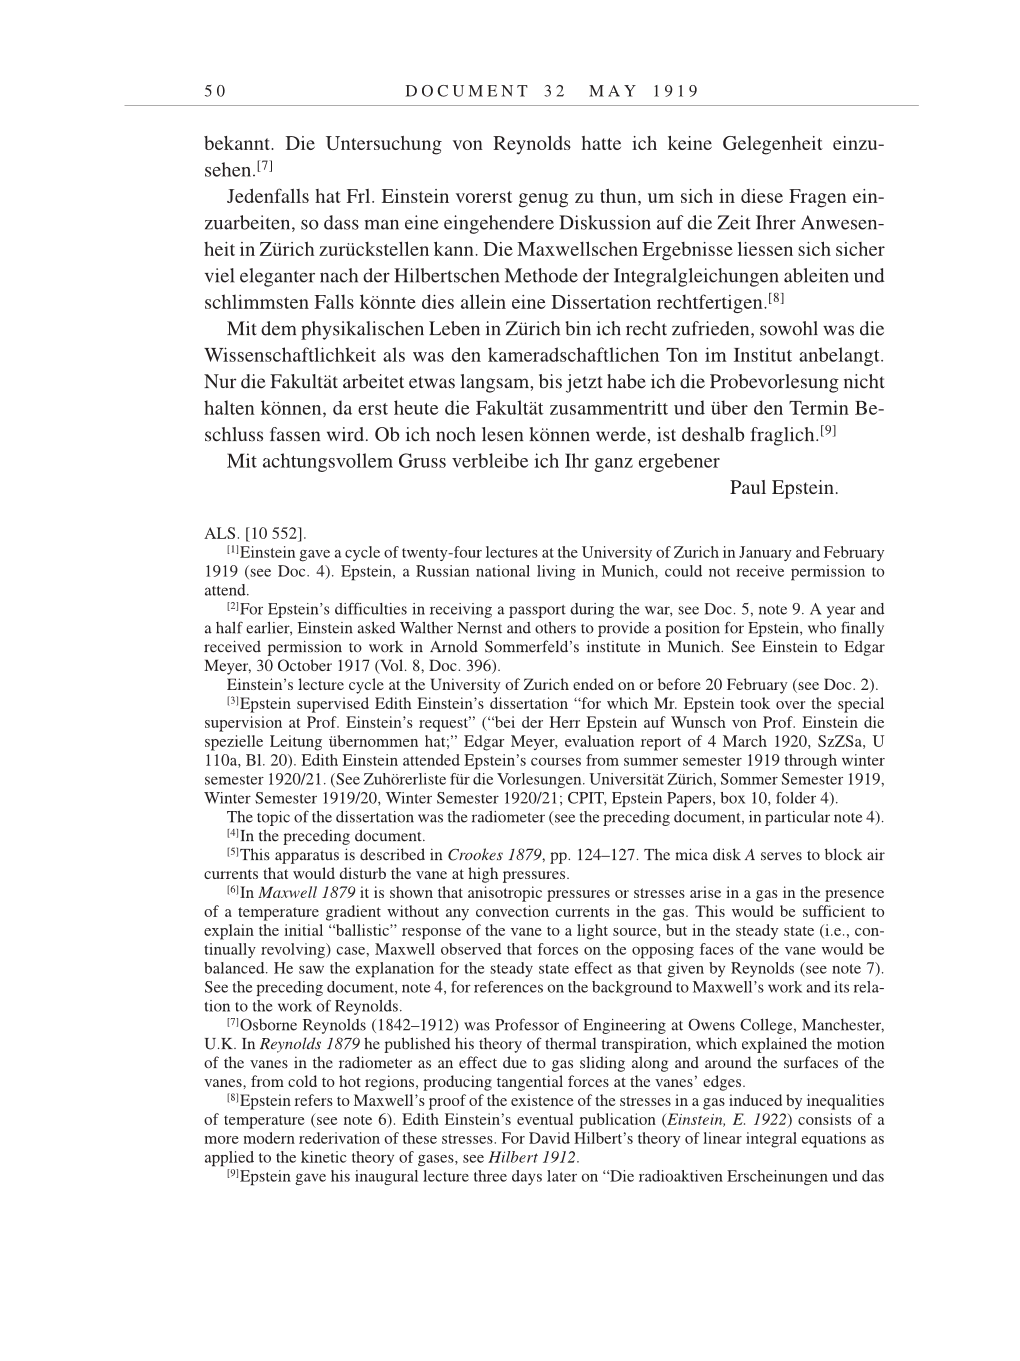 Volume 9: The Berlin Years: Correspondence January 1919-April 1920 page 50